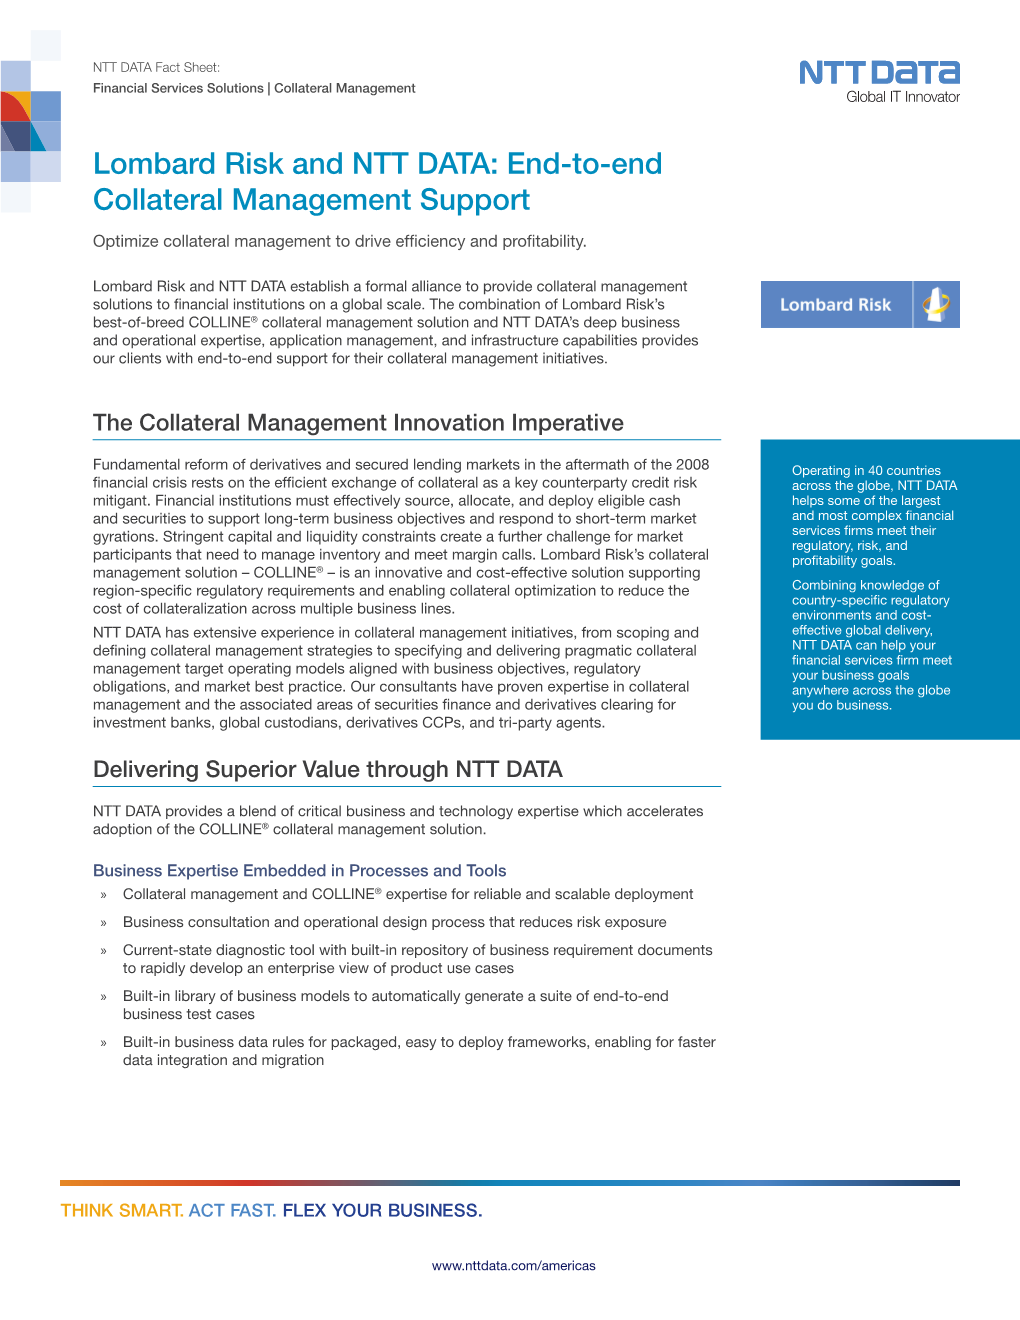 Lombard Risk and NTT DATA: End-To-End Collateral Management Support